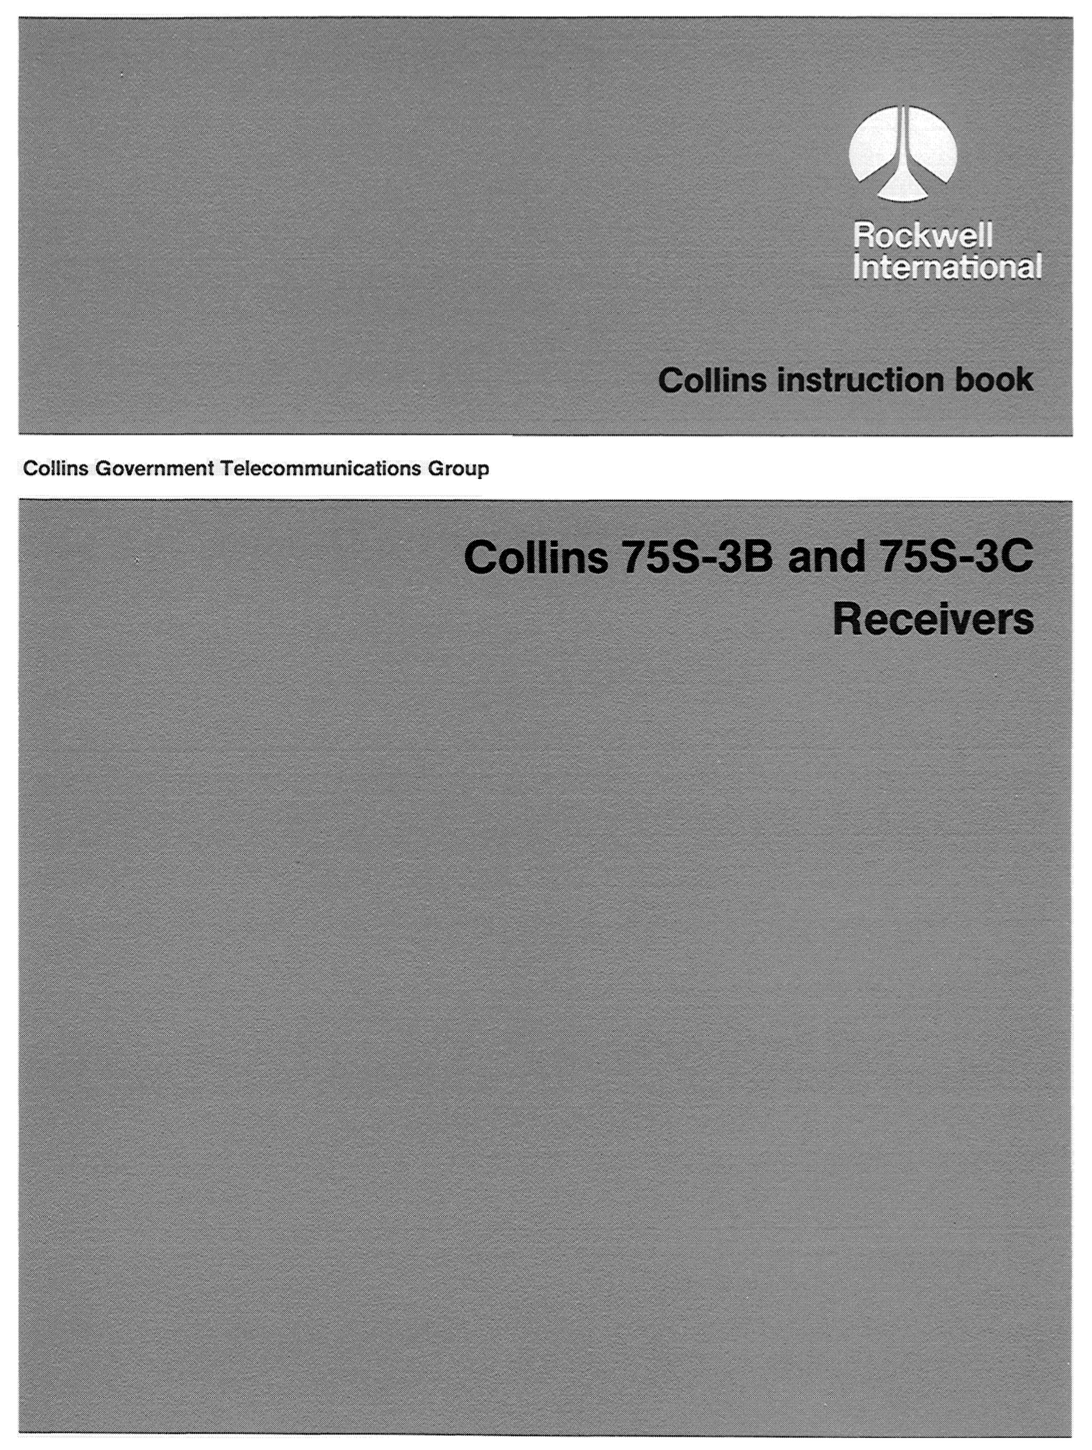 Collins 75S-3B S-Line Receiver - Instruction Manual - 7th Edition - (1975-11)